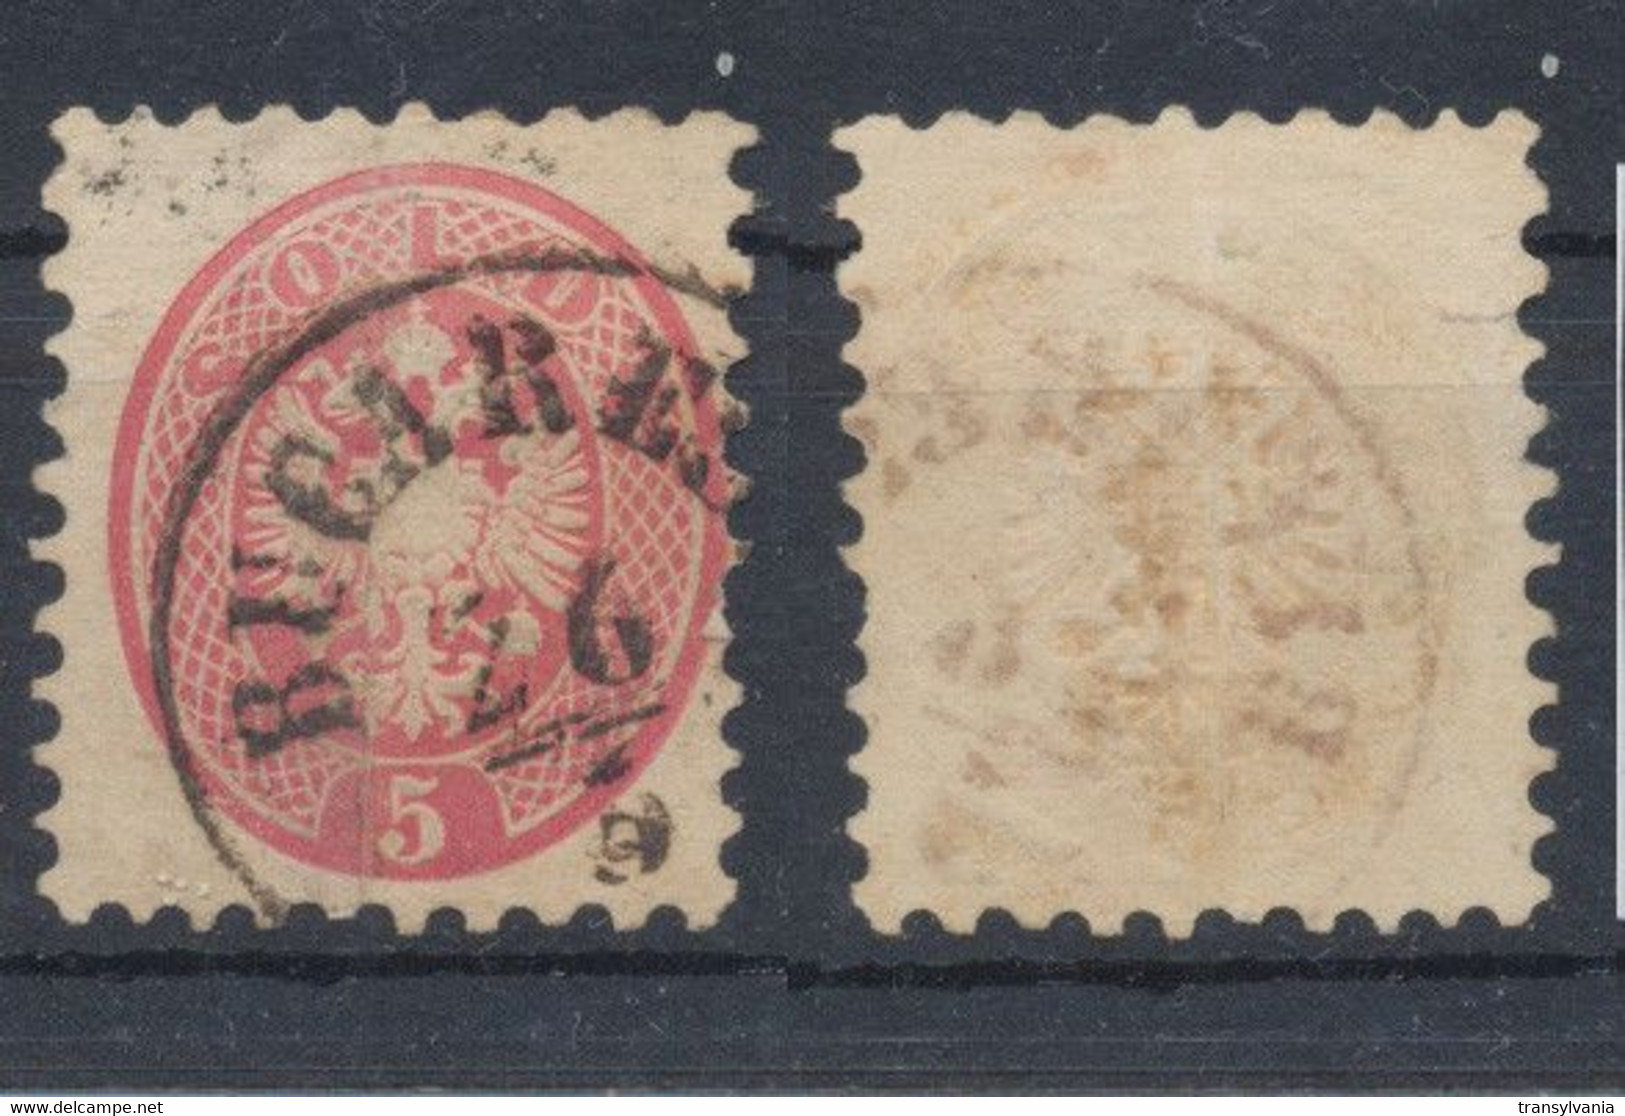 Romania 1864 Austria Post In Levant 5 Kreuzer Stamp With Bukarest Cancellation Applied At Bucuresti - Occupations